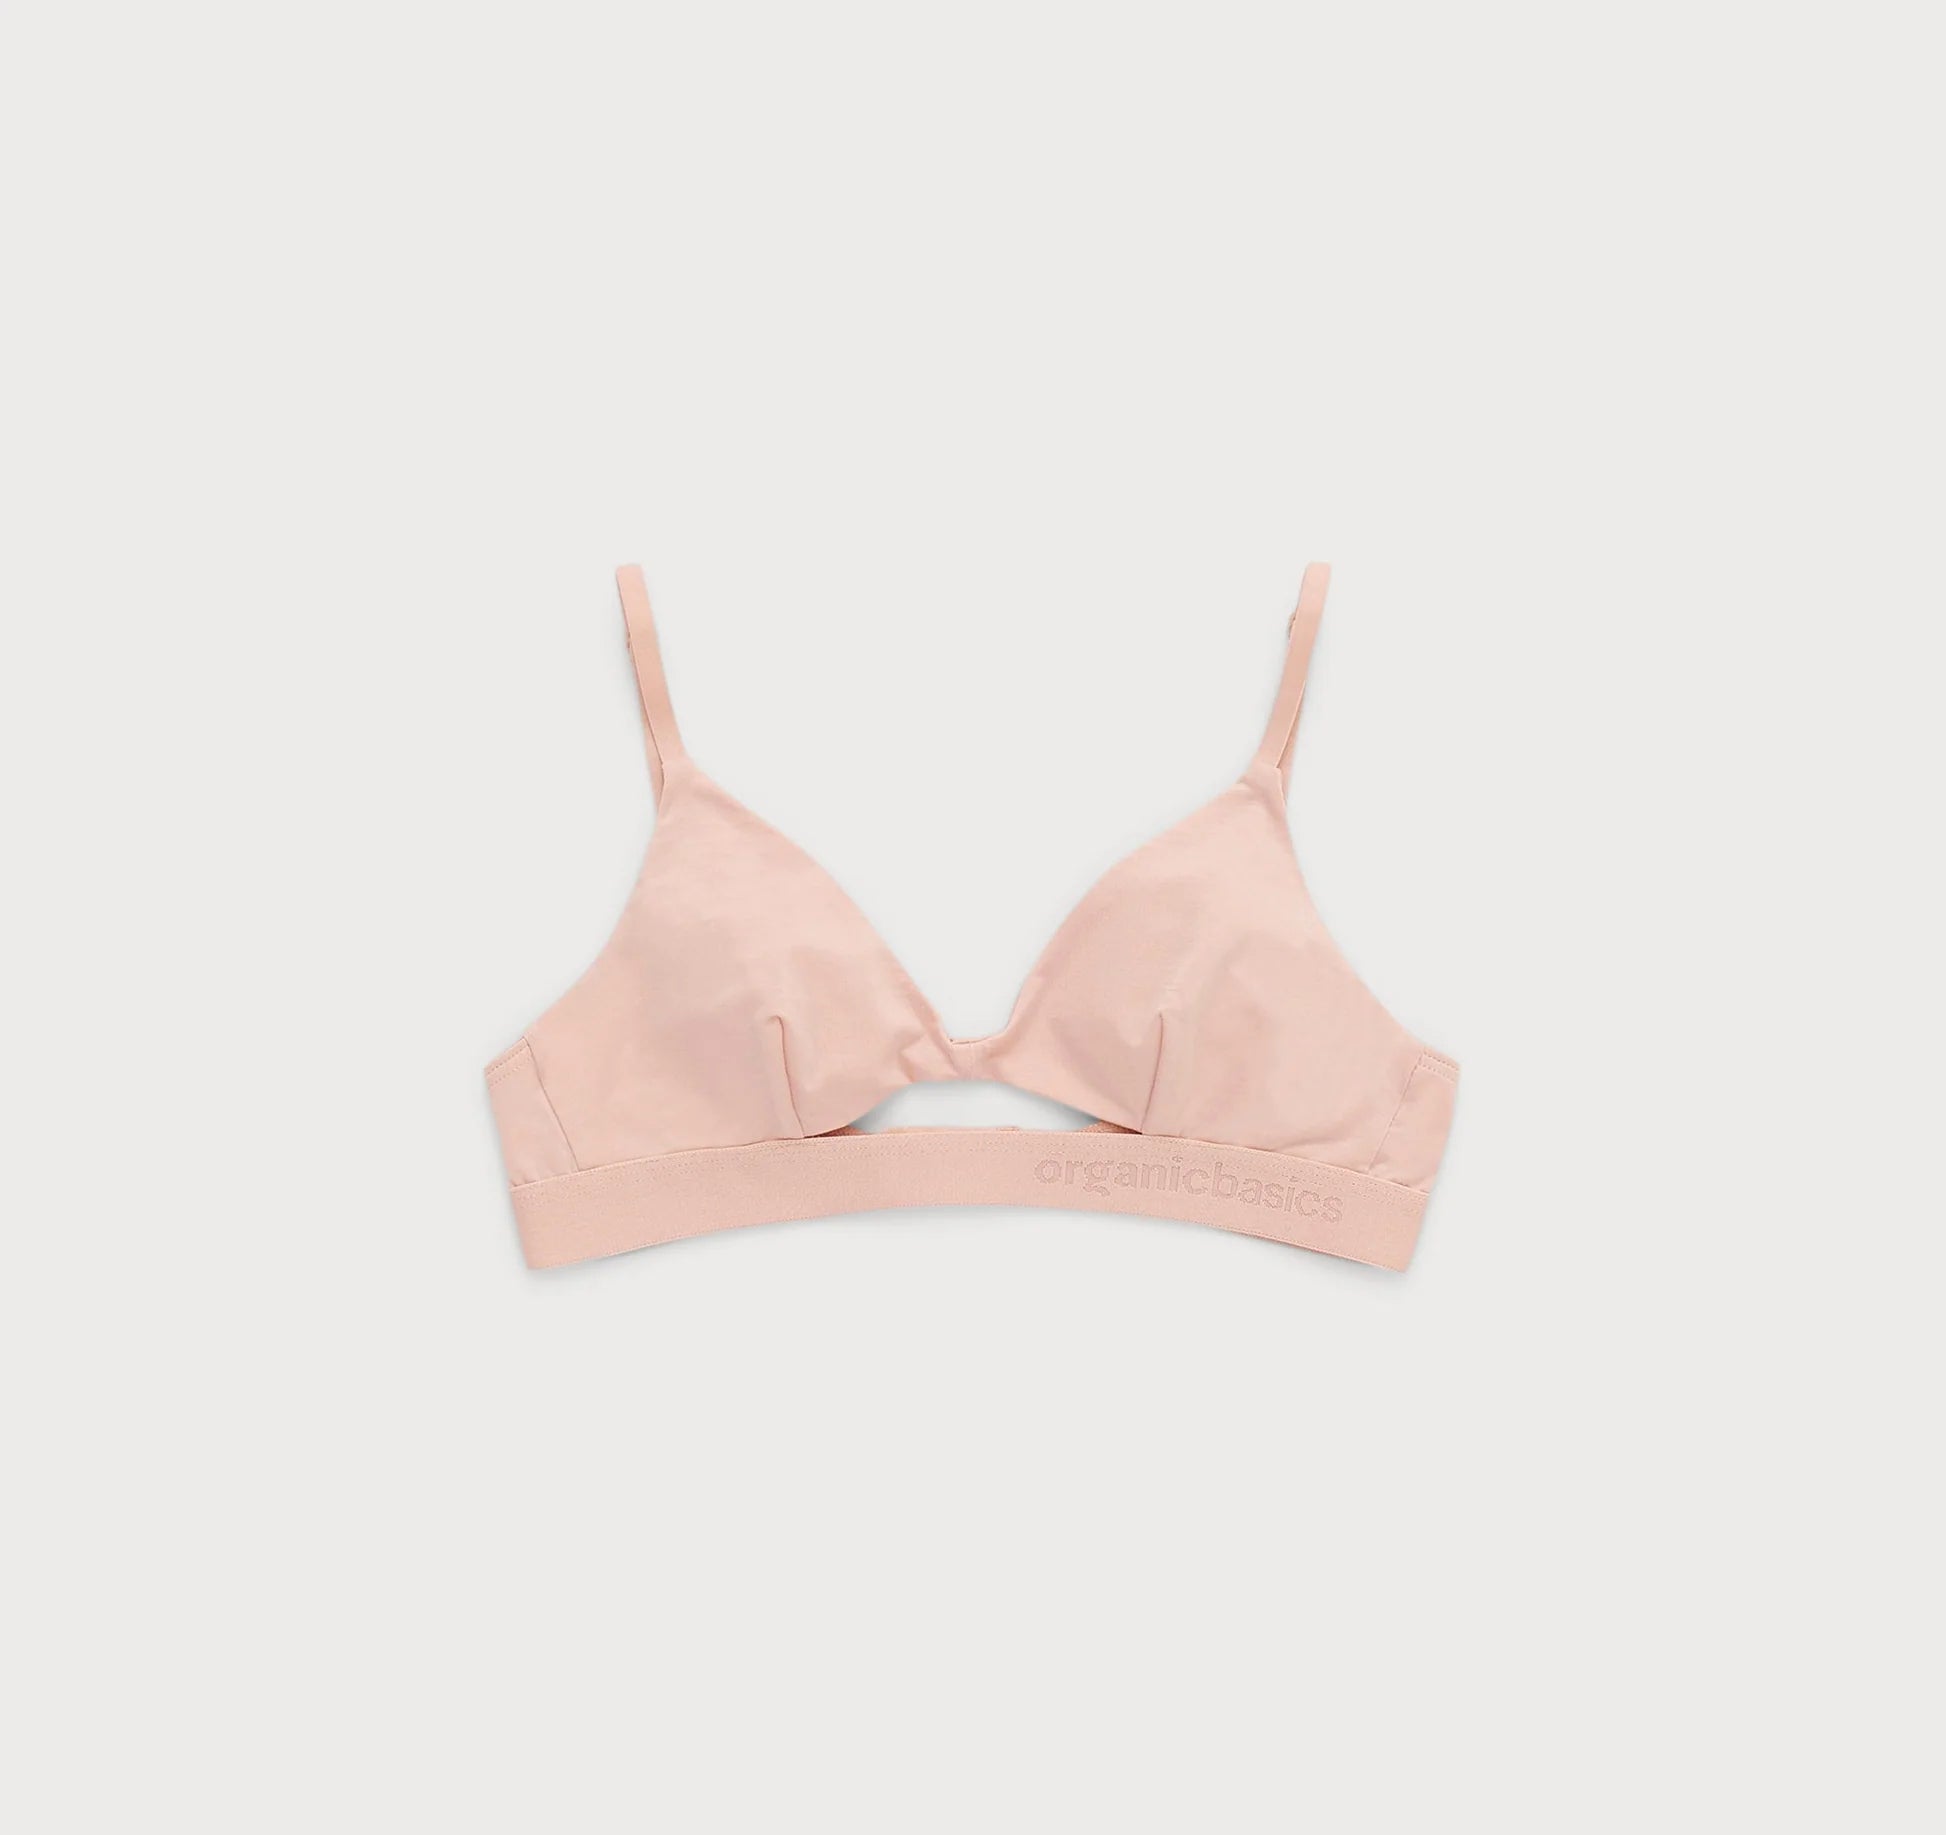 A comfortable and adjustable Soft Touch Bralette - Soft Pink with a bow on the back from Organic Basics.